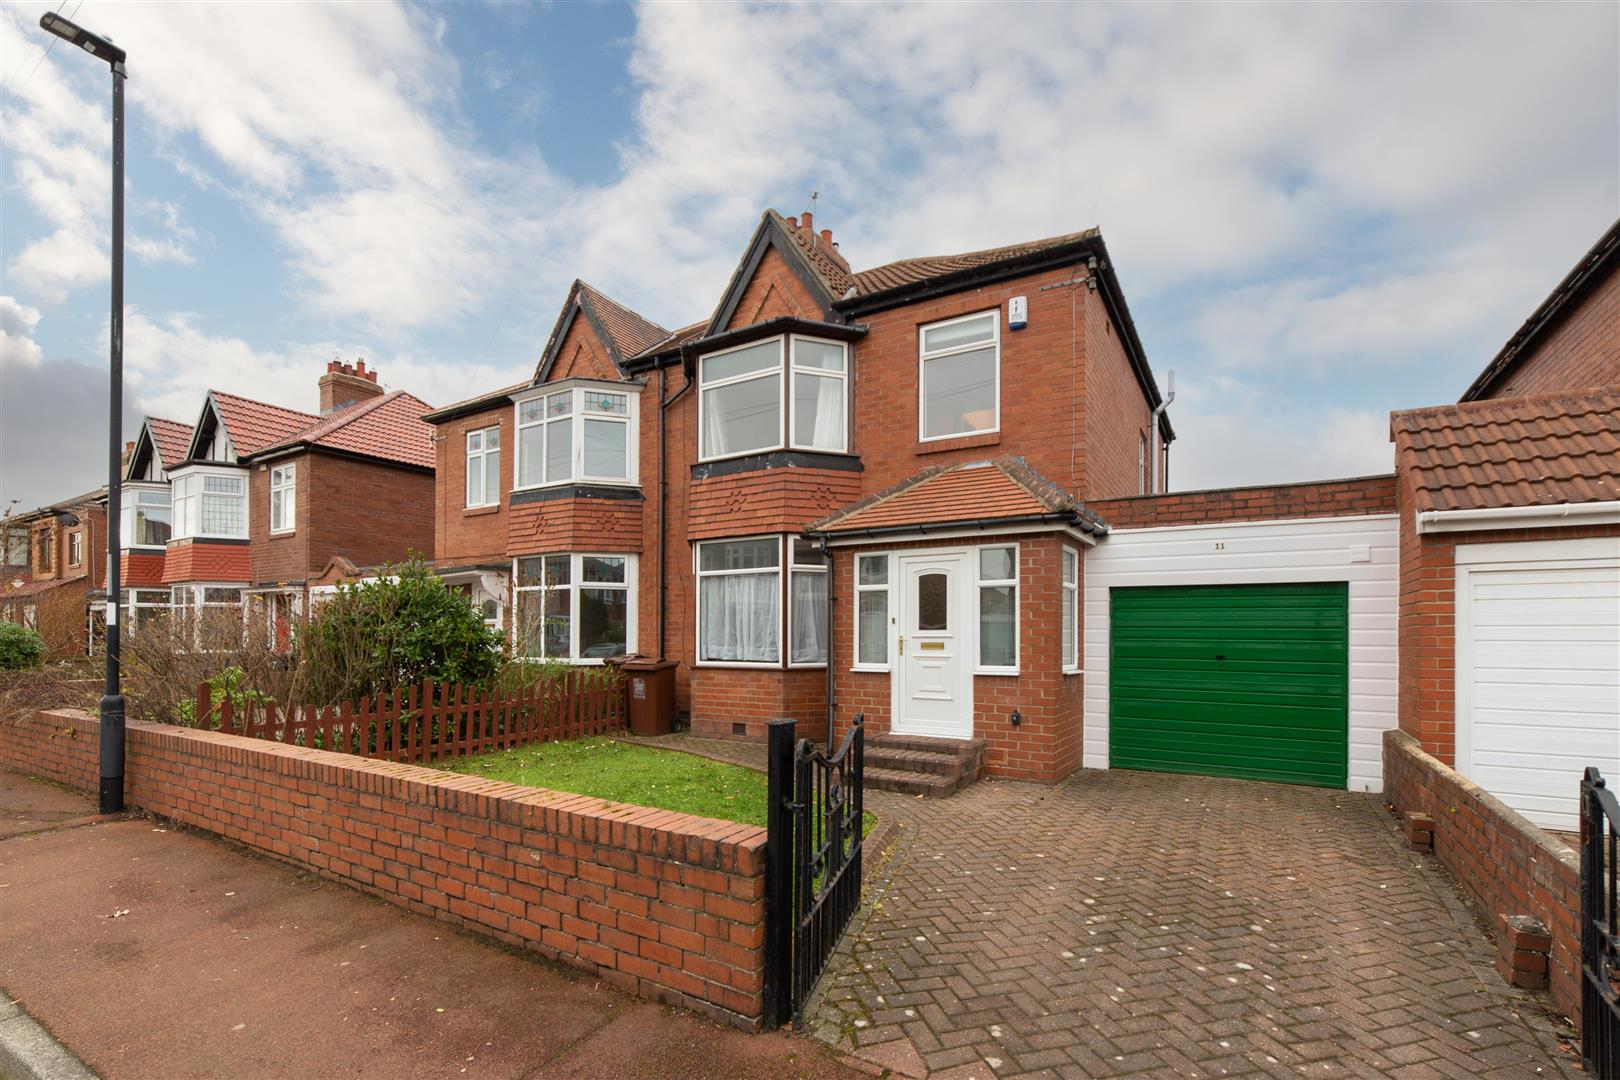 3 bed semi-detached house for sale in Prestwick Gardens, Newcastle Upon Tyne, NE3 